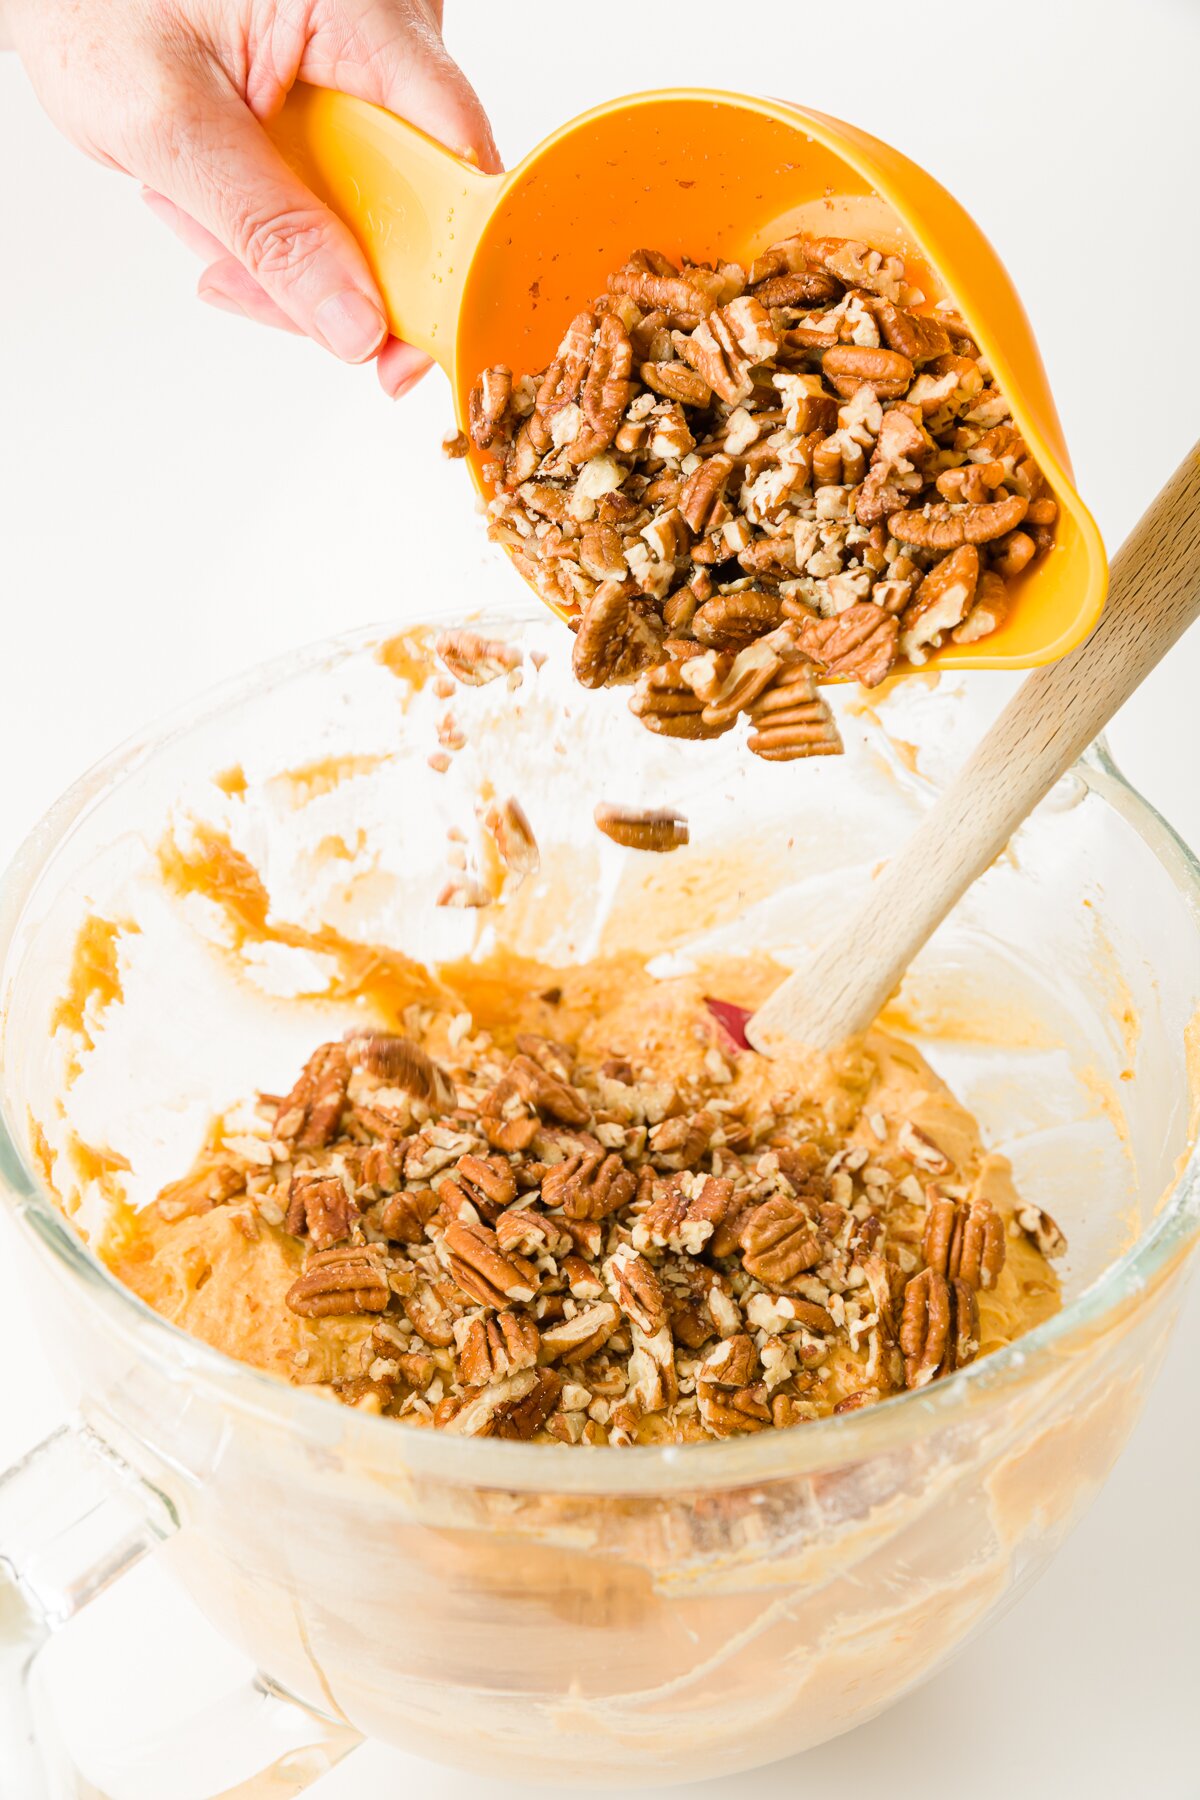 Pouring pecans into a glass mixing bowl filled with batter